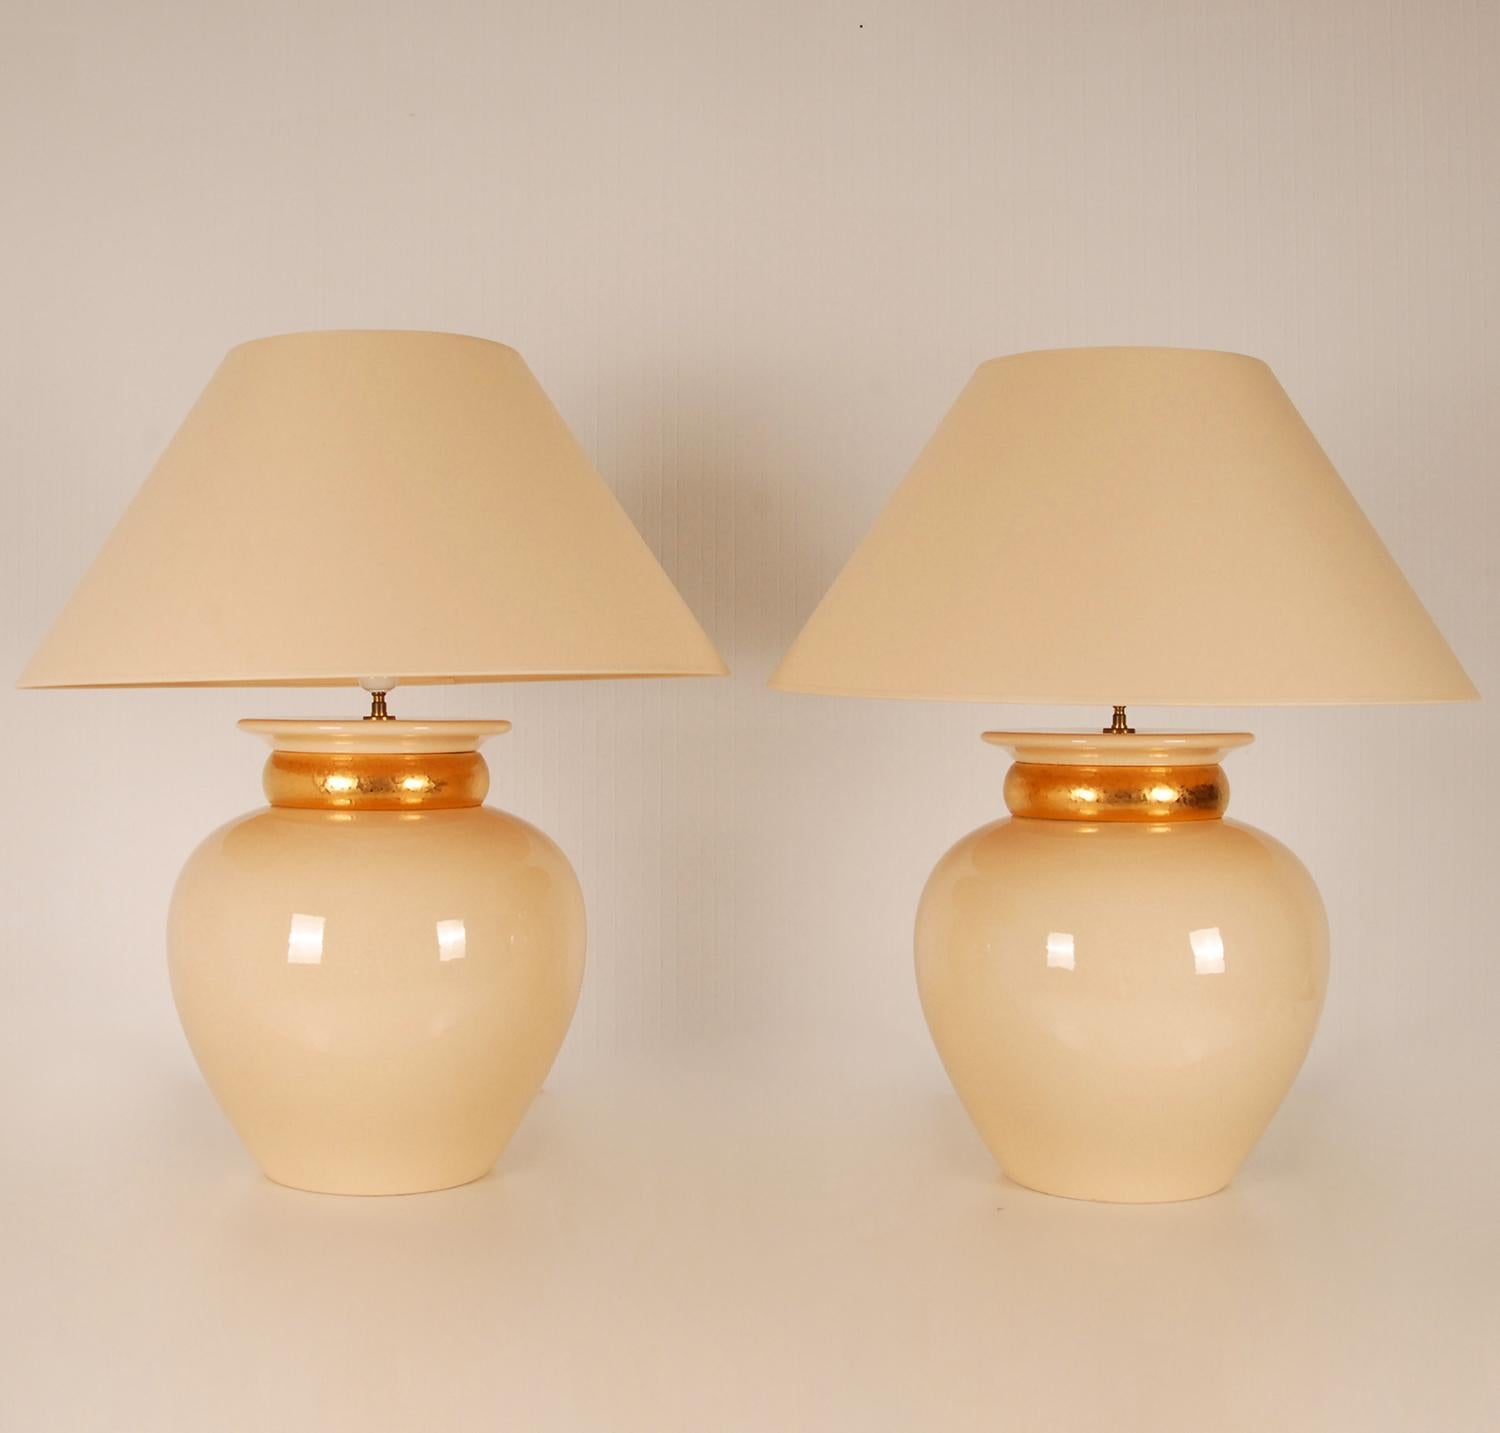 A pair of large French table lamps - huge vase lamps
Material: Porcelain - Ceramic
Design : Robert Kostka France (Marked with label)
Producer: In the style of Longwy
Style: Vintage, Mid Century, Hollywood Regency, Modern
Color: Gold and